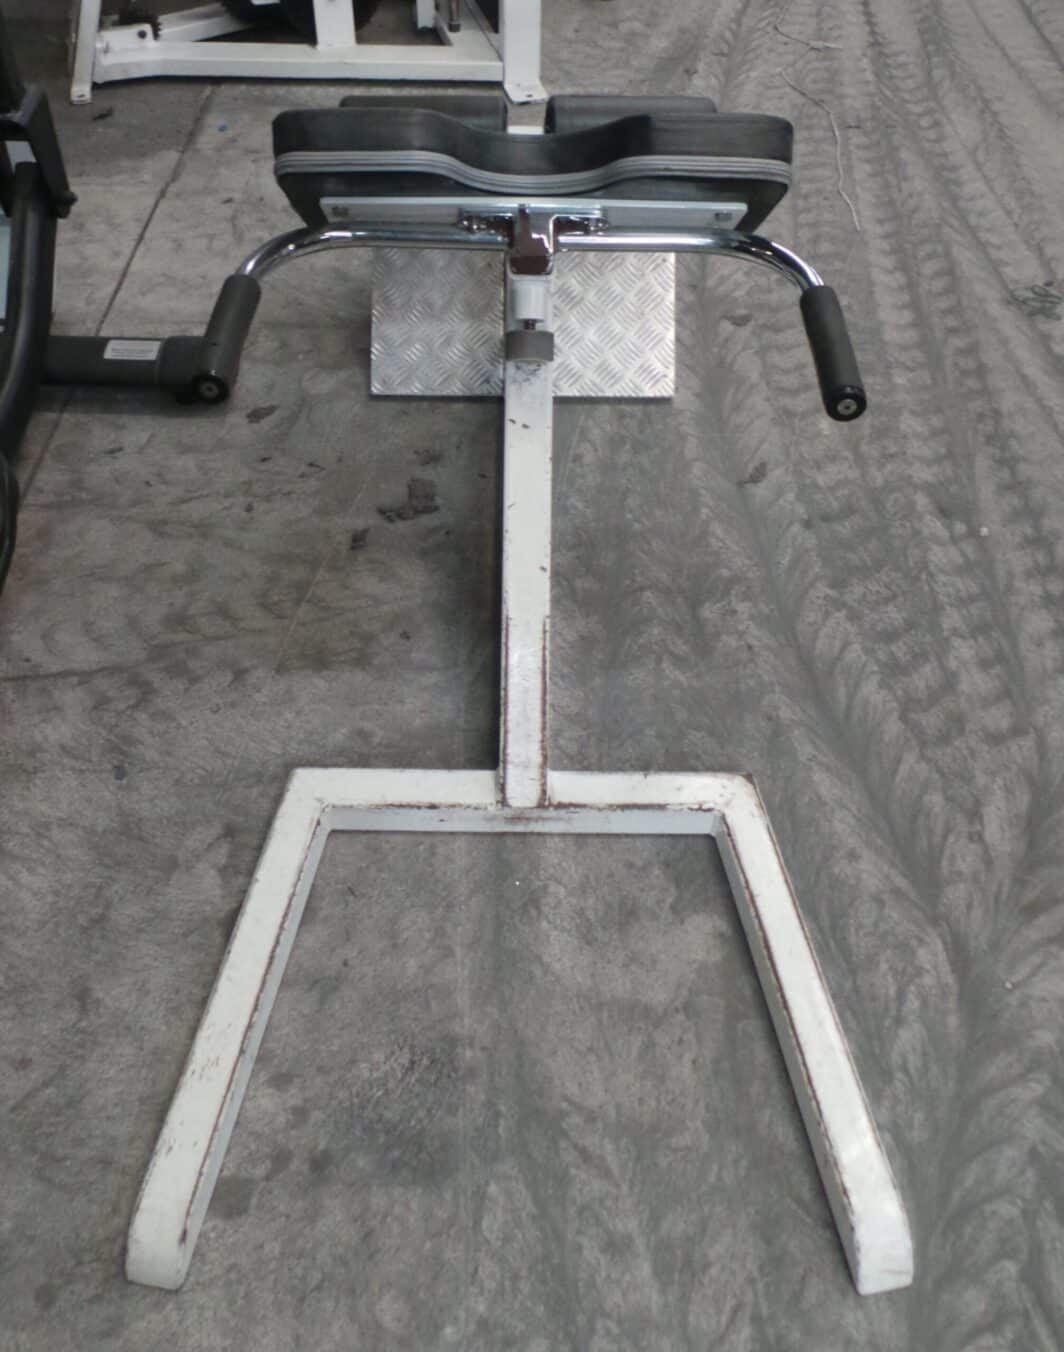 Calgym Hyper Extension 2nd hand commercial gym equipment for sale